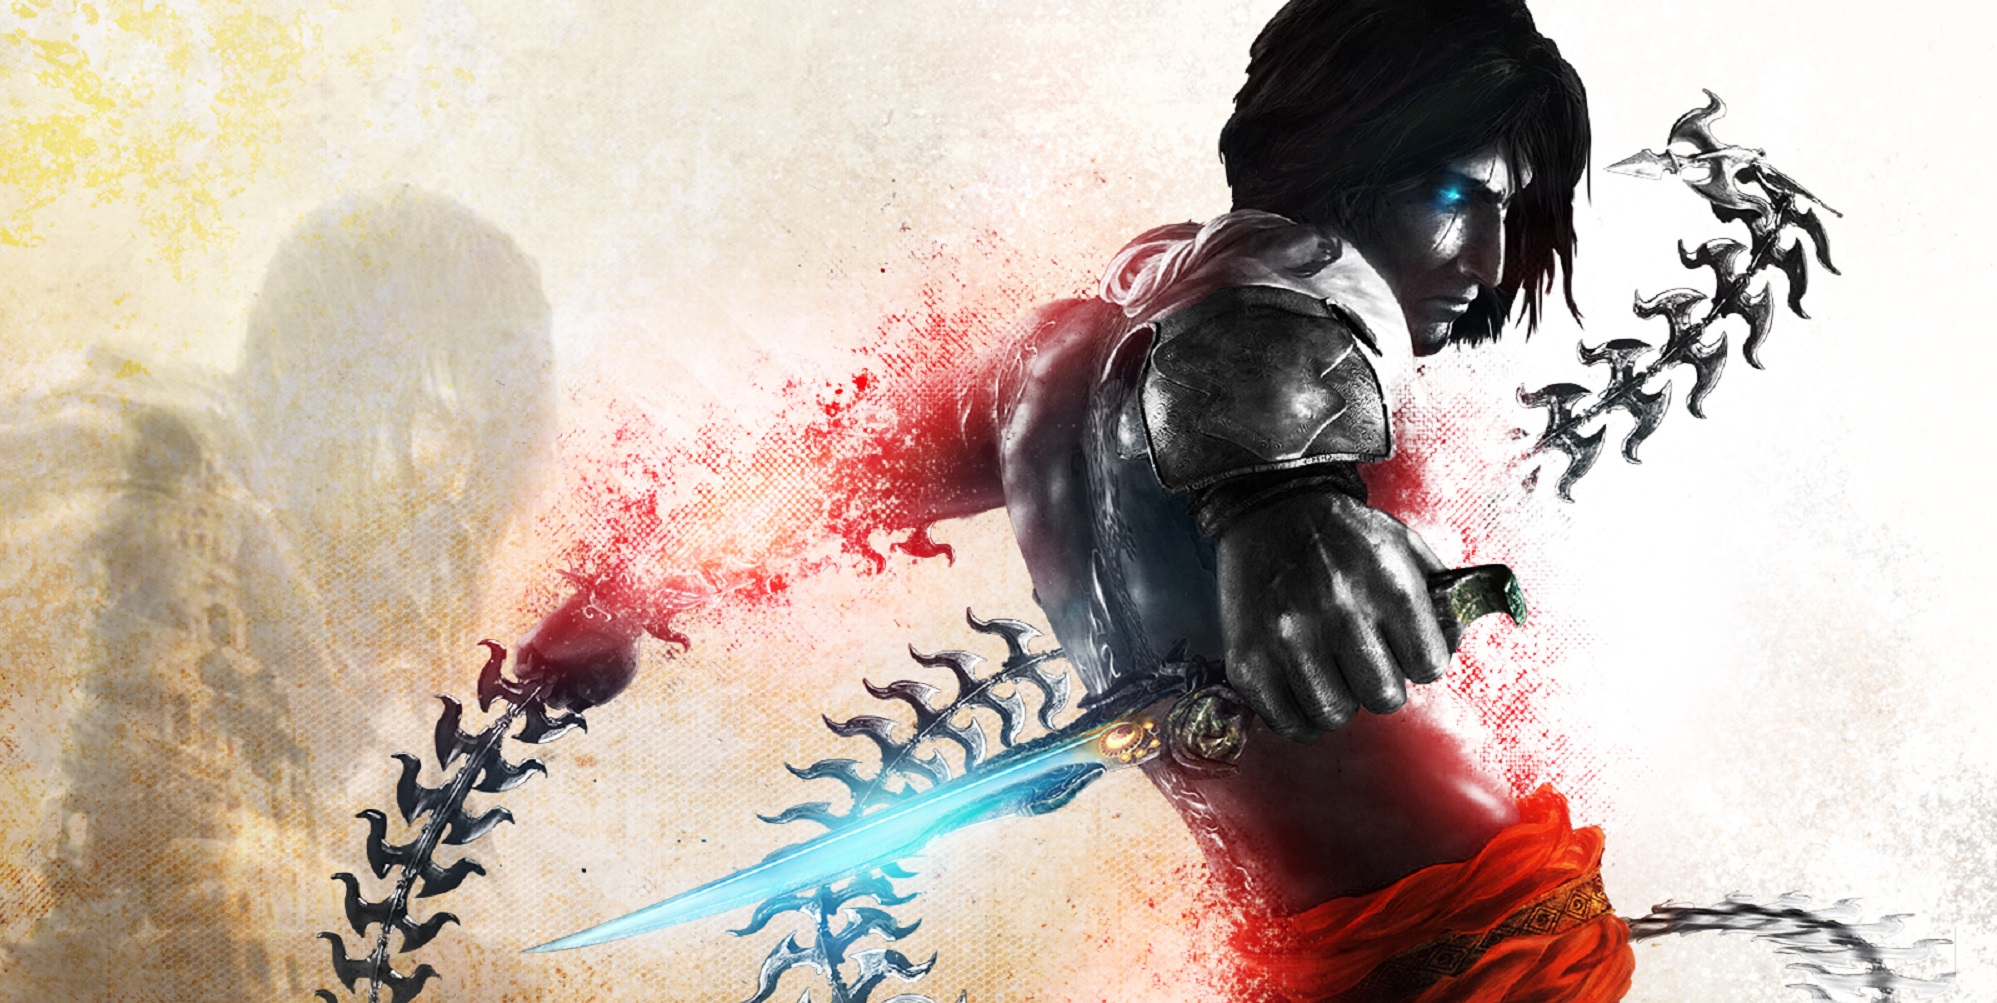 Prince of Persia, this capture is from one of the later games in the umbrella of the series.